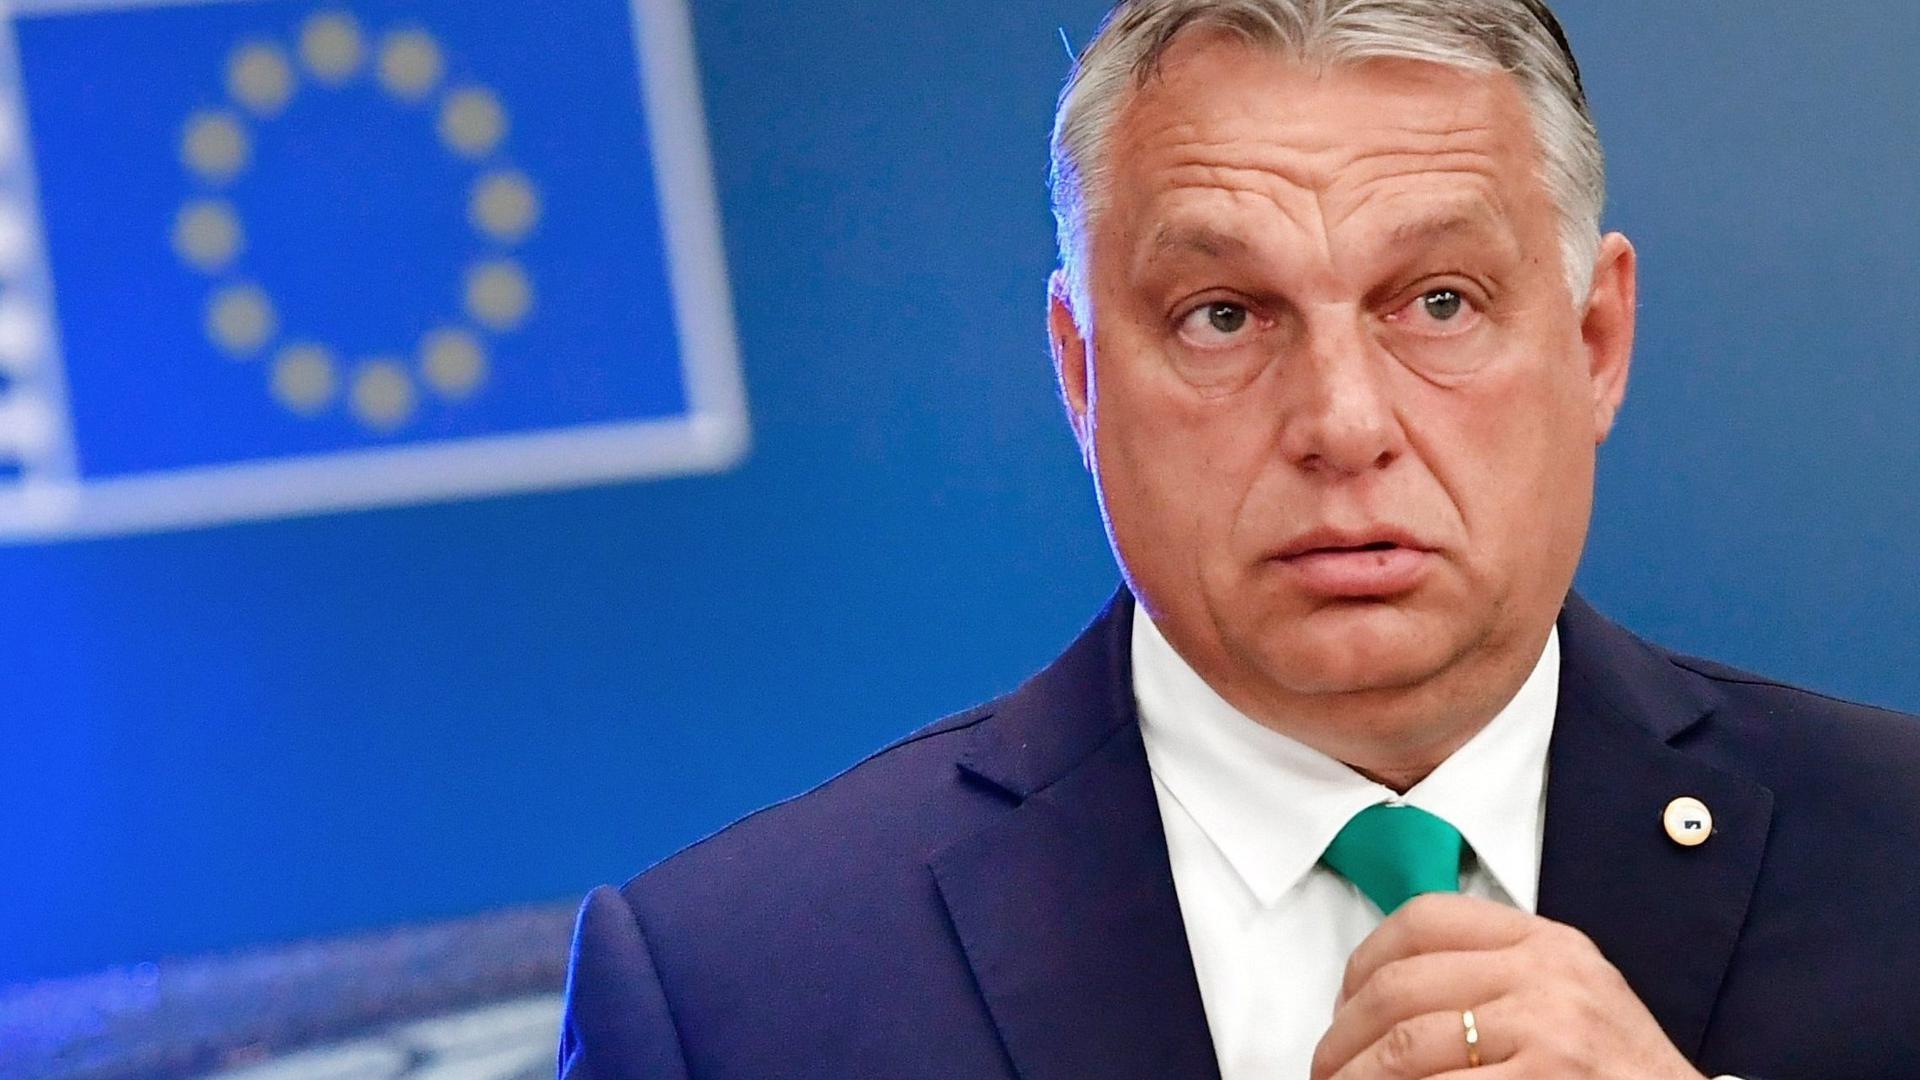 Measures taken by Hungary's government, led by Prime Minister Viktor Orban, have caused alarm in Brussels